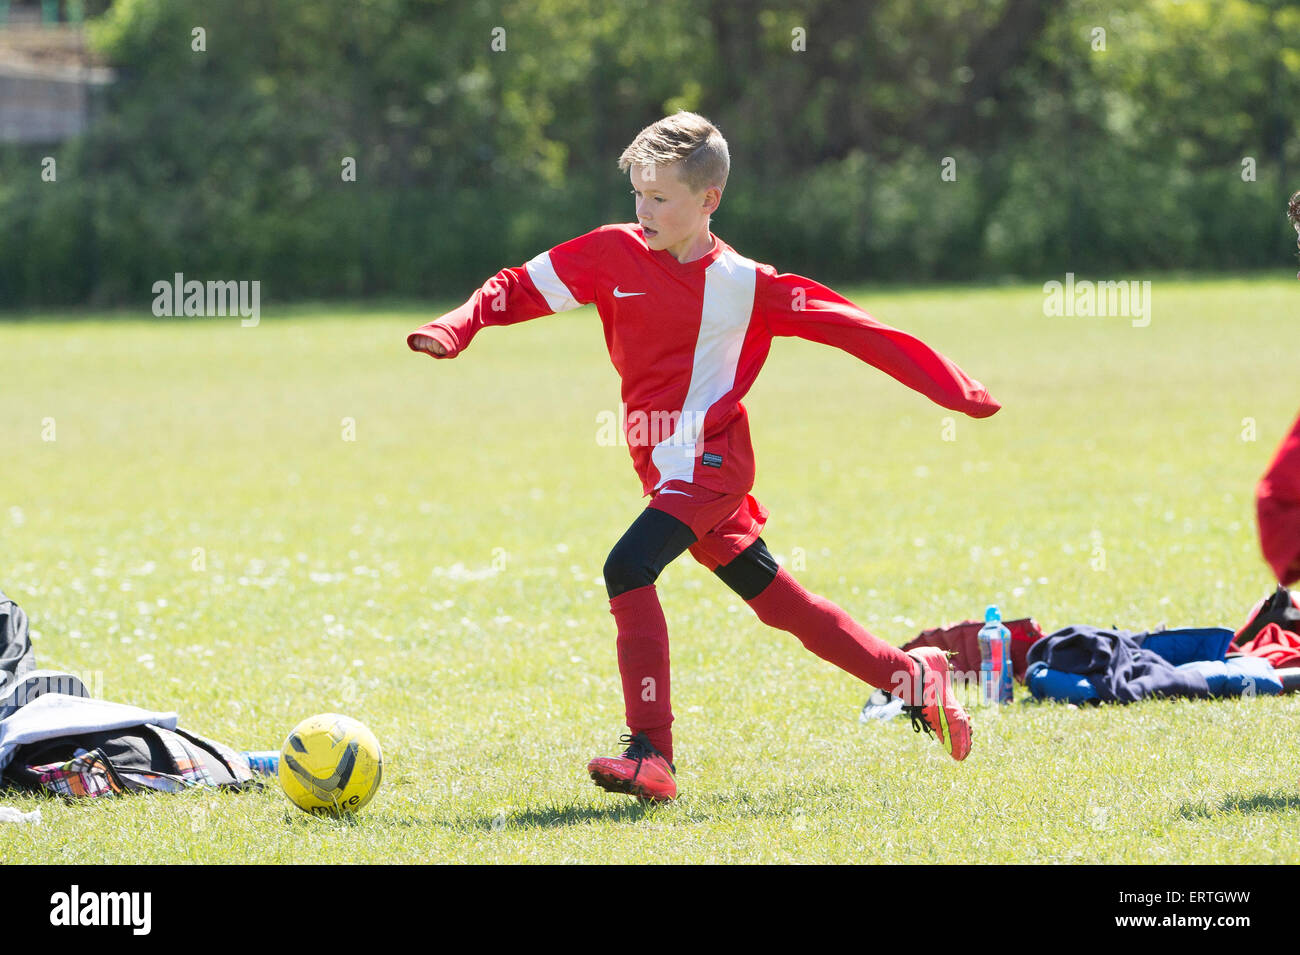 Young boy playing football in the park wearing his red football kit chasing the ball Stock Photo